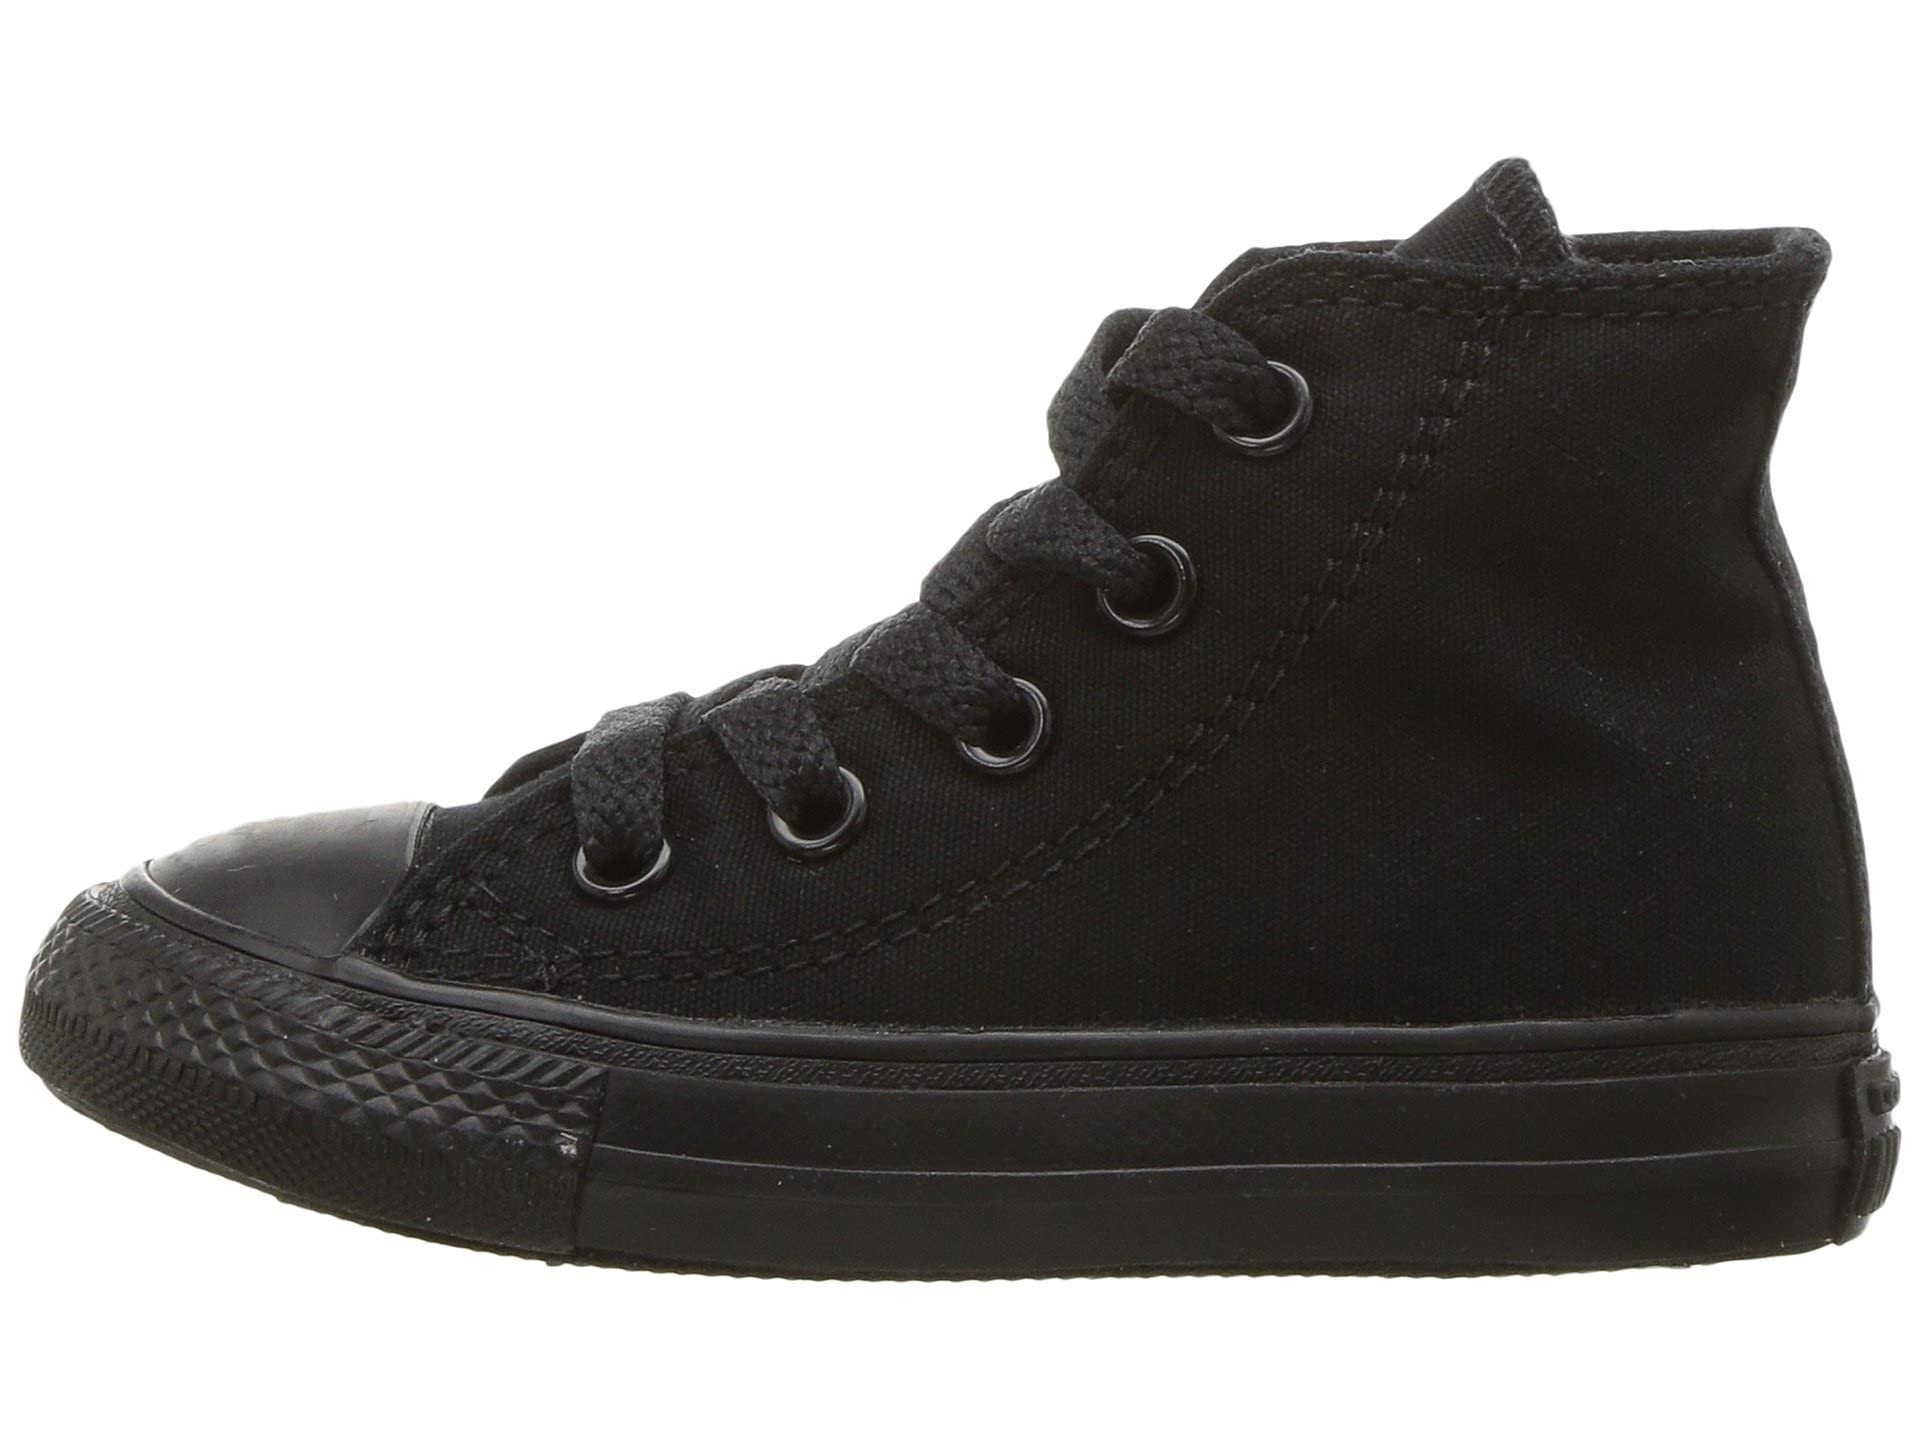 Converse Baby Chuck Taylor All Star Canvas High Top Sneaker, Black Monochrome, 2 M US Infant